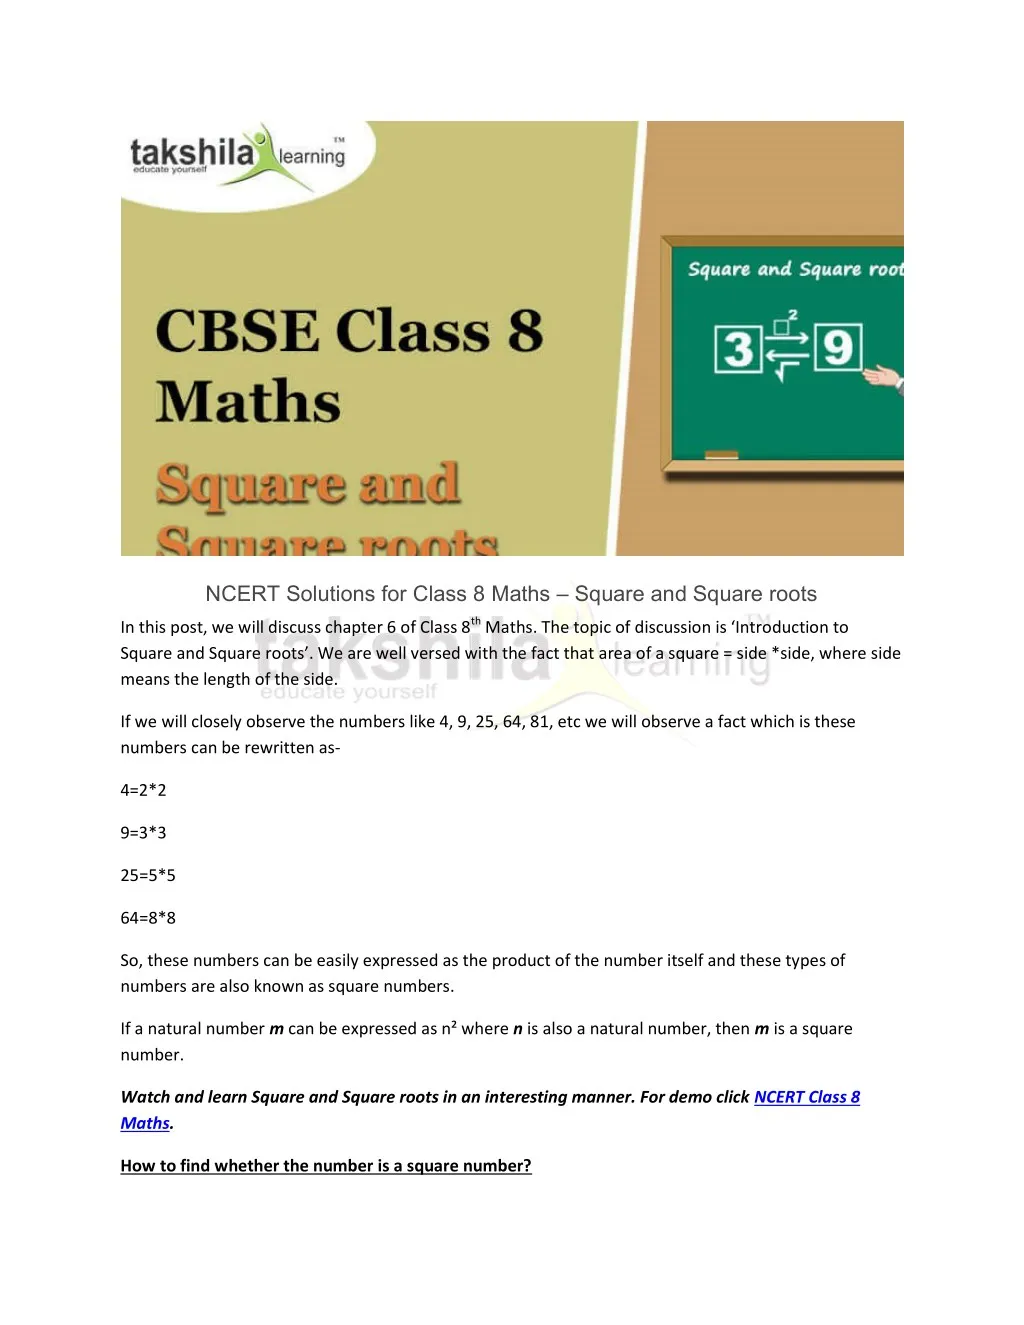 ncert solutions for class 8 maths square